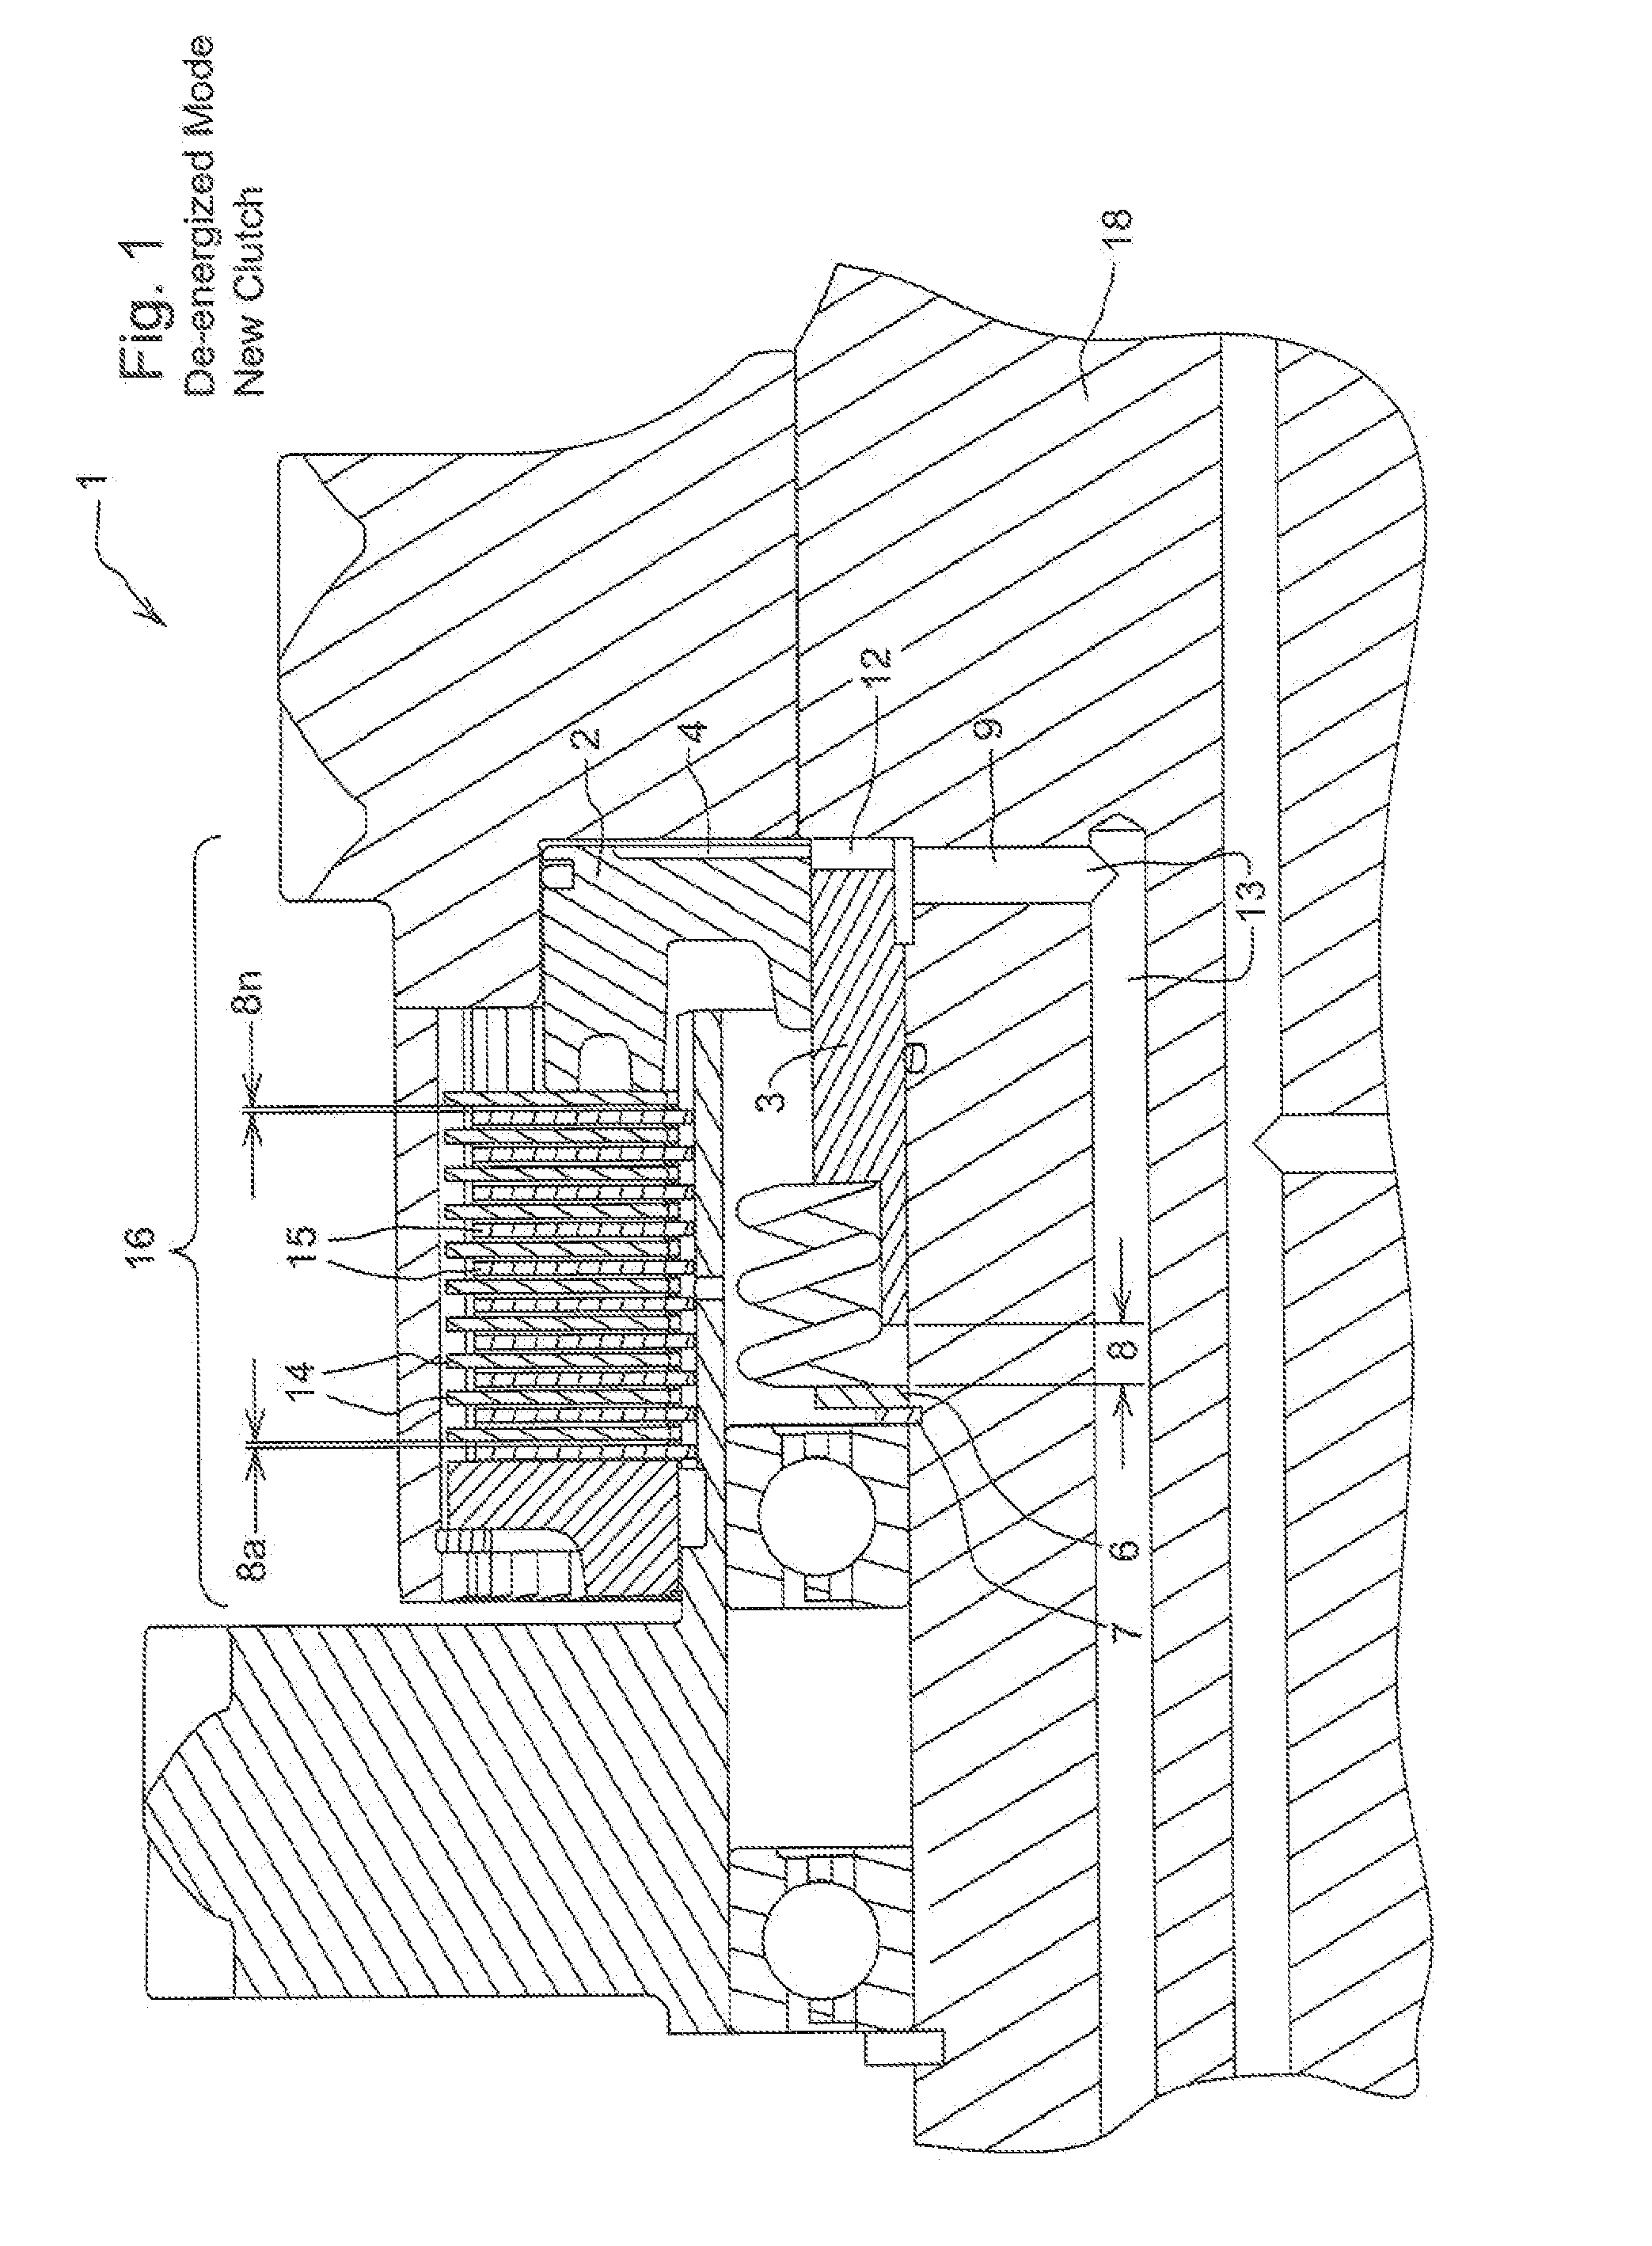 Powershift Transmission Clutch System With A Predetermined Running Clearance